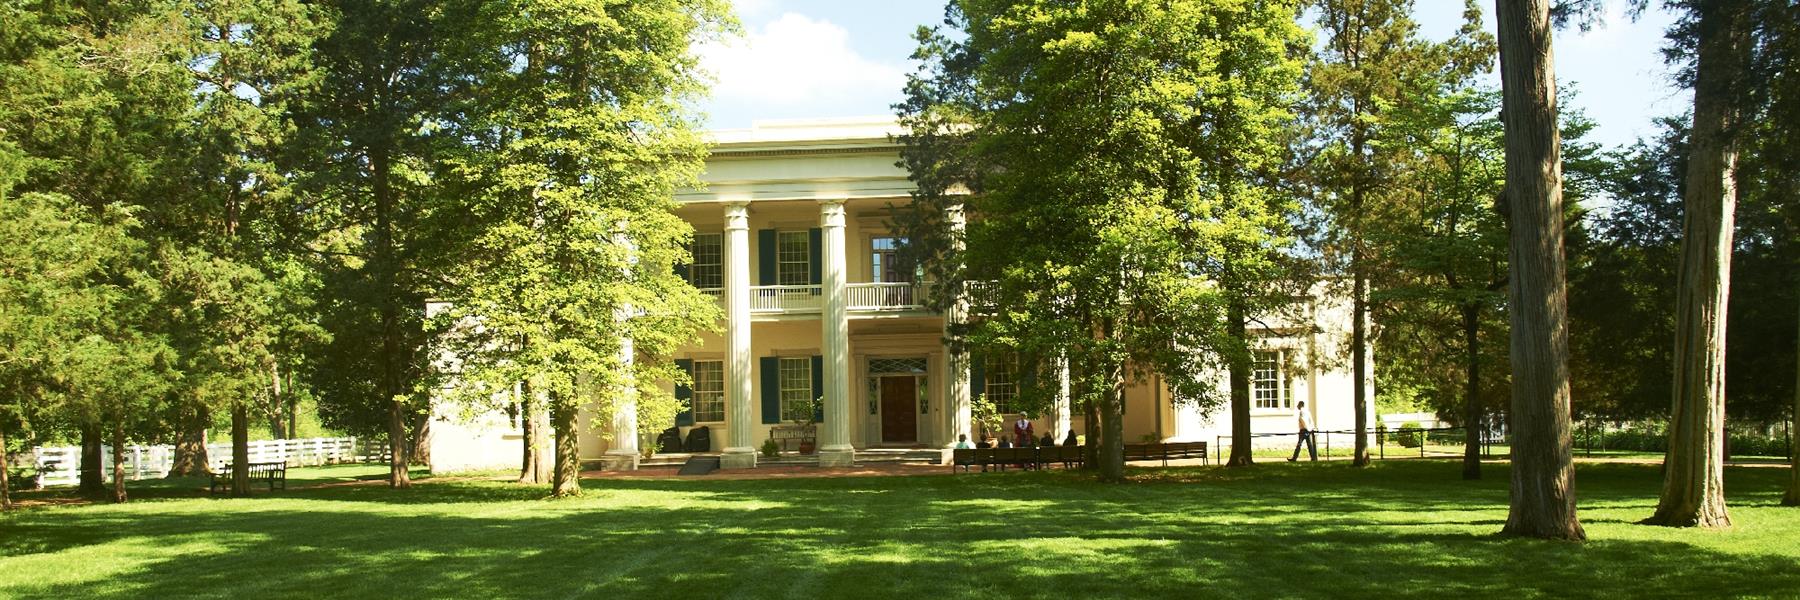 Andrew Jackson’s Hermitage in Hermitage, Tennessee